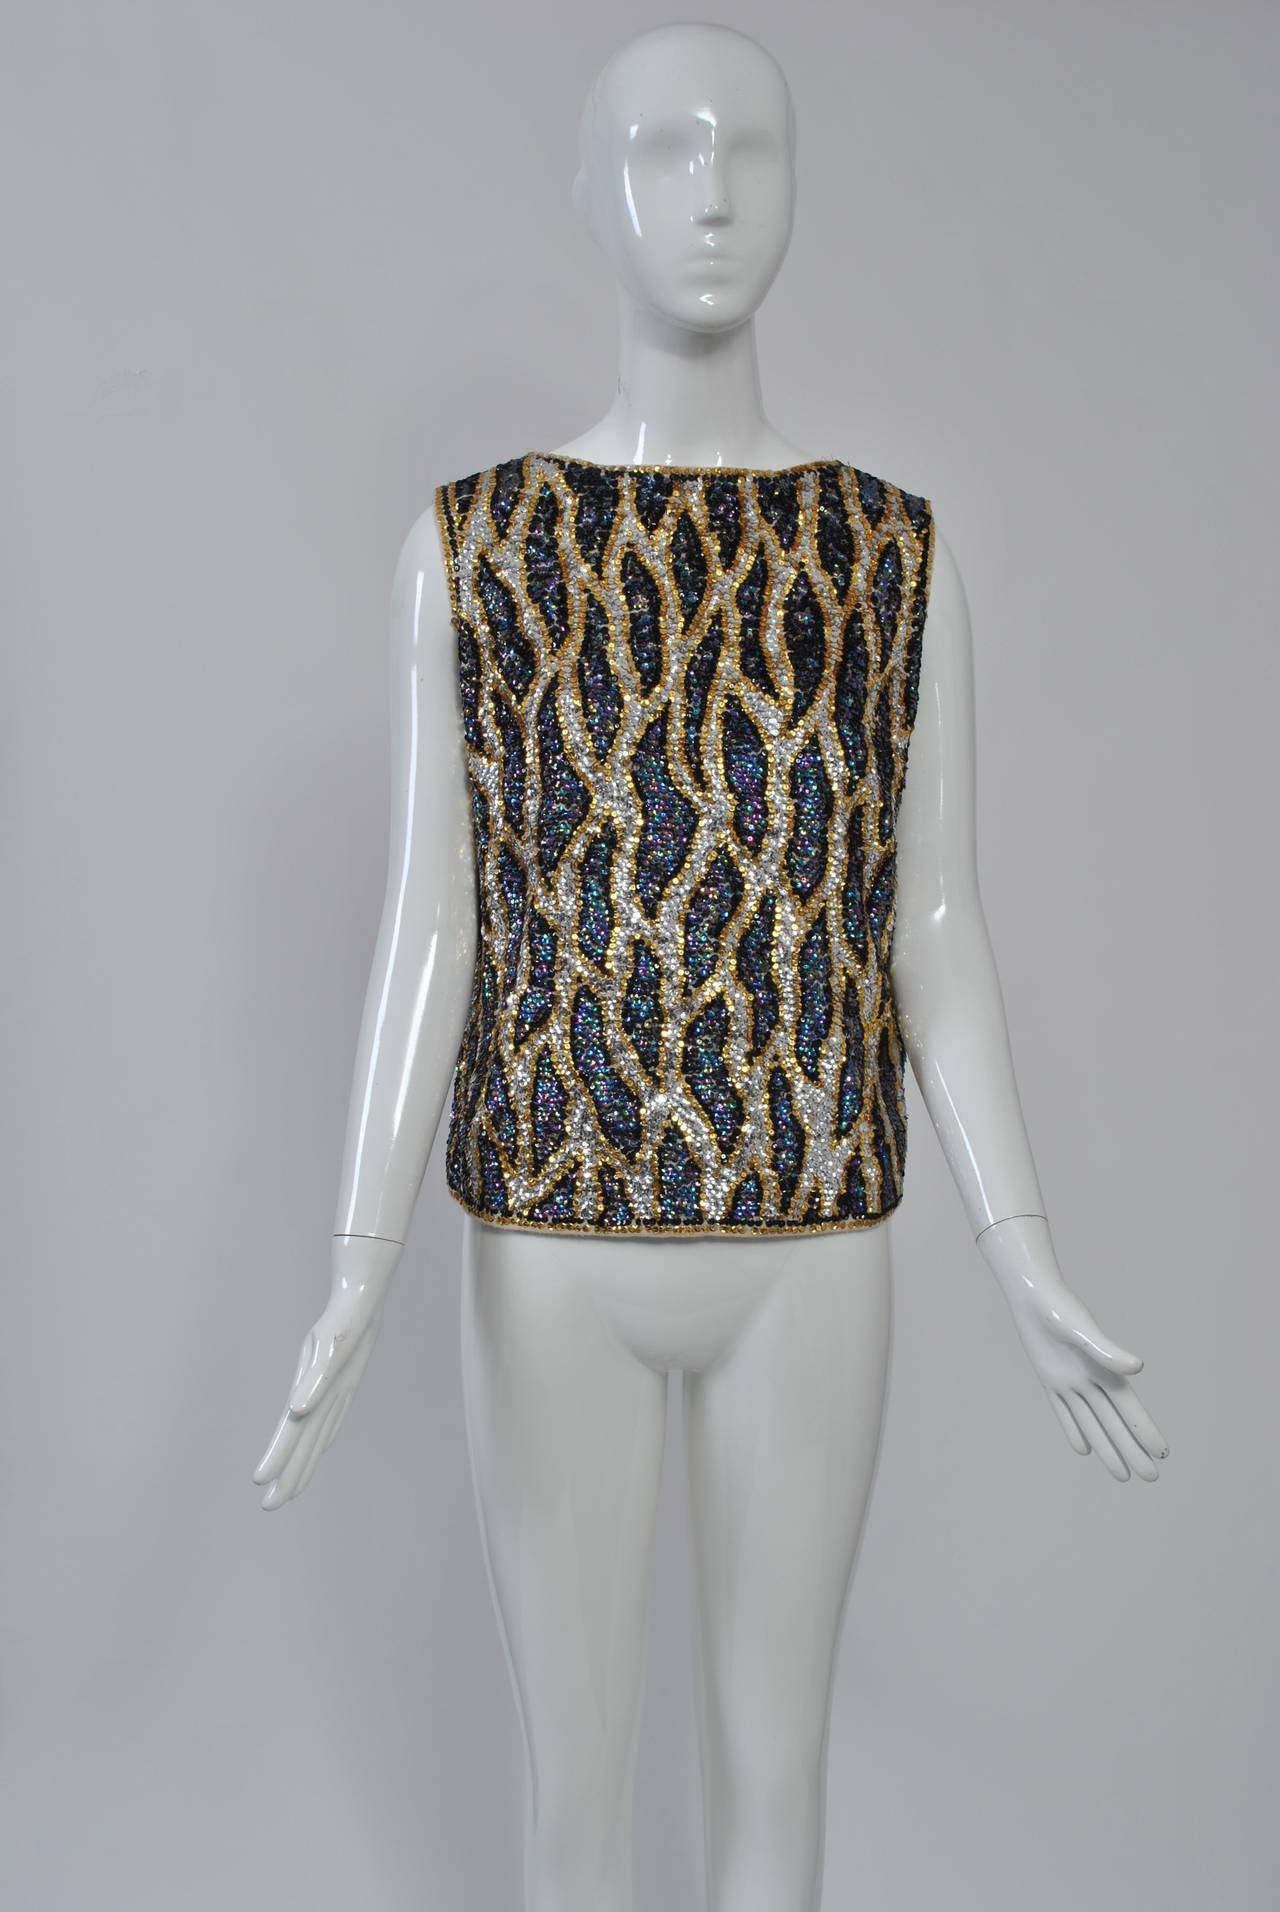 Beaded and sequined knits, mostly made in Hong Kong, were extremely popular during the 1950s and '60s. This example of a shell is among the best and most unusual we have seen, both in its embellished design and its coloring. Back zipper. Lined.